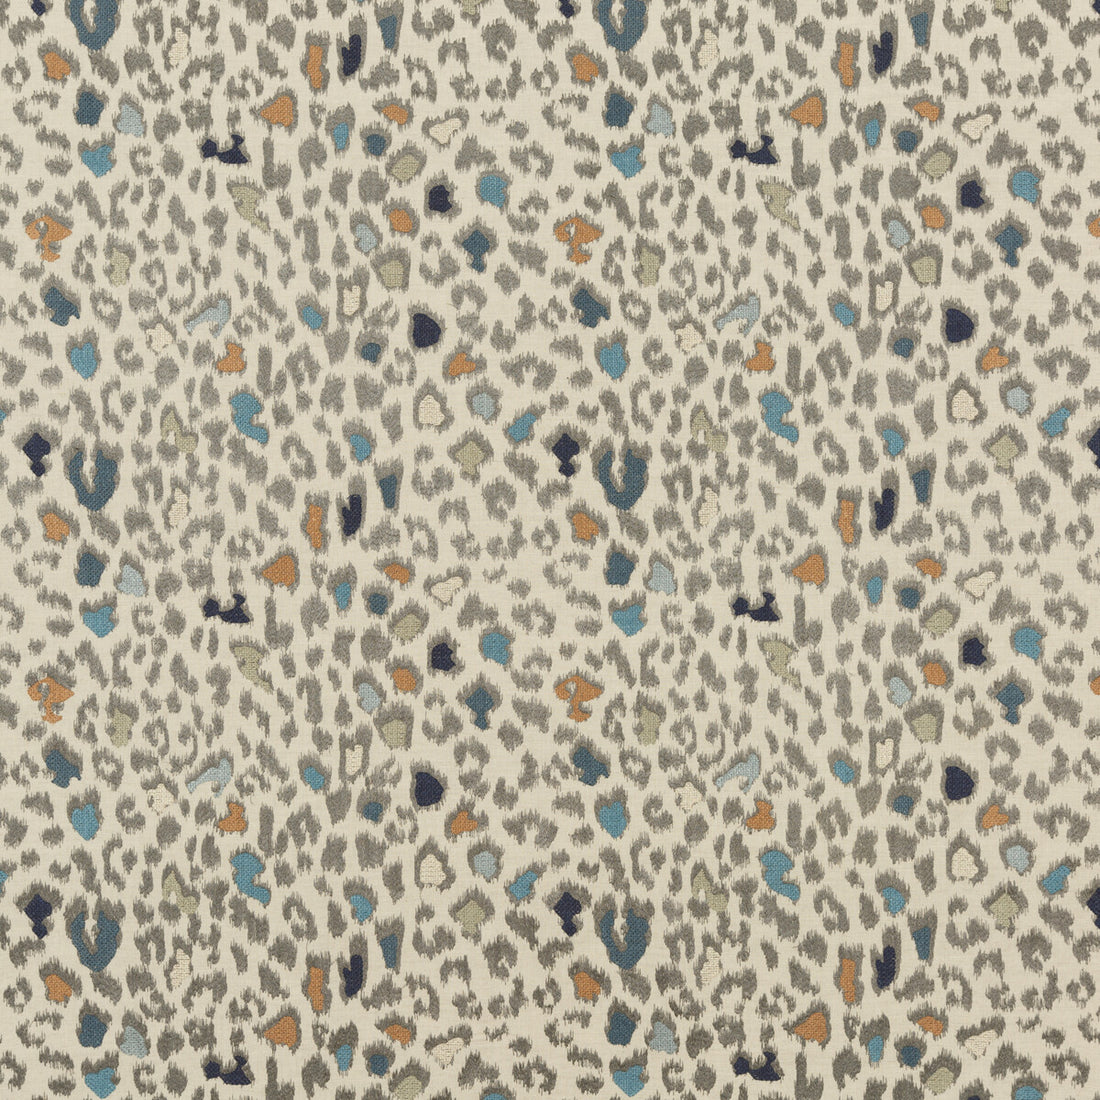 Animal Magic fabric in teal color - pattern FD764.R11.0 - by Mulberry in the Festival collection